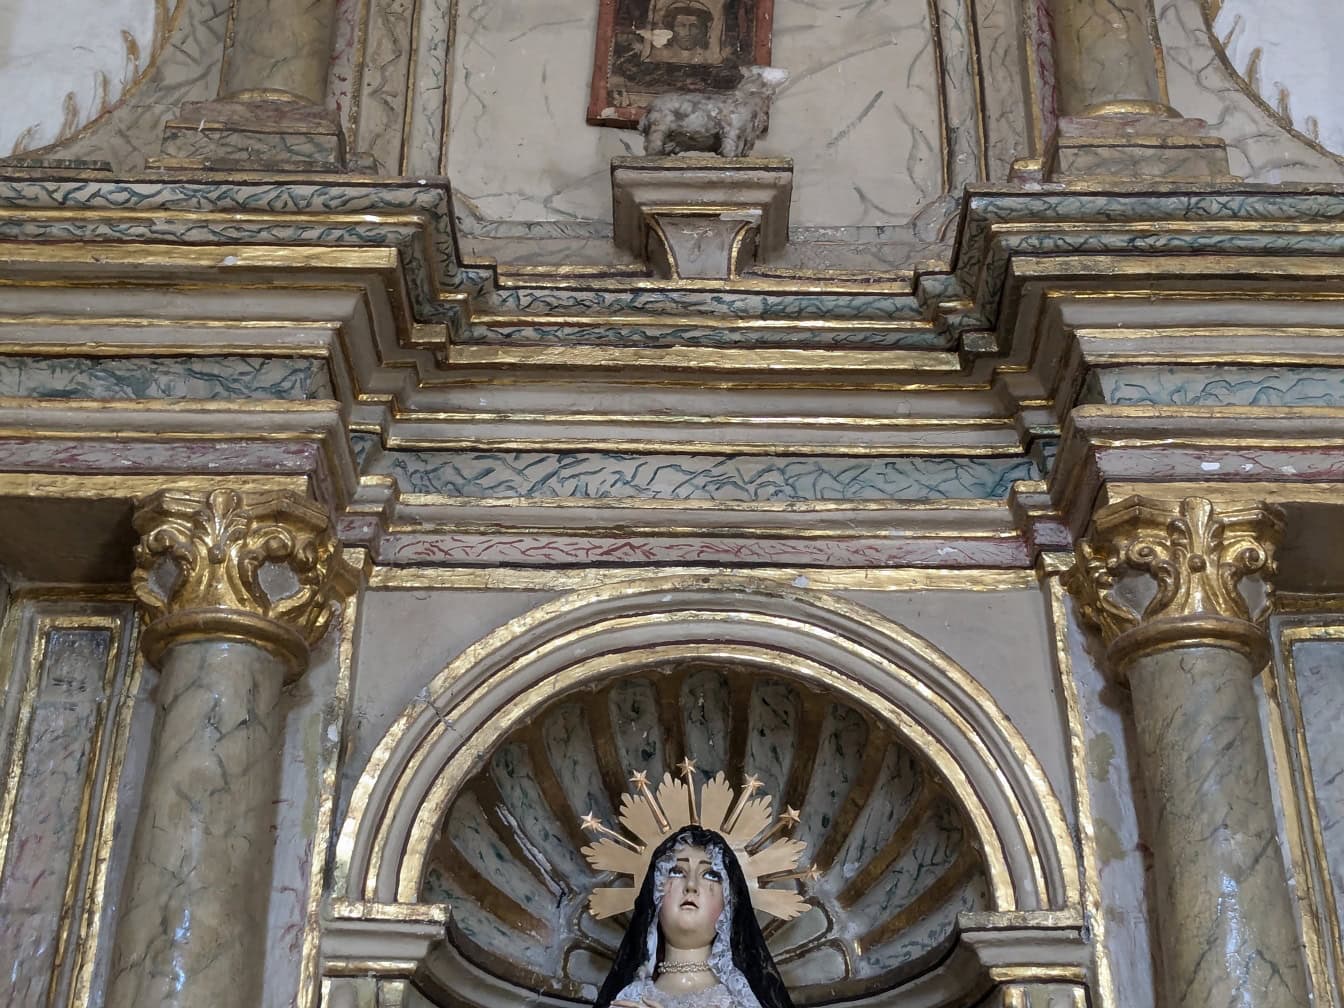 The statue of St. Mary, the mother of Jesus Christ in the altar niche in the Catholic Church